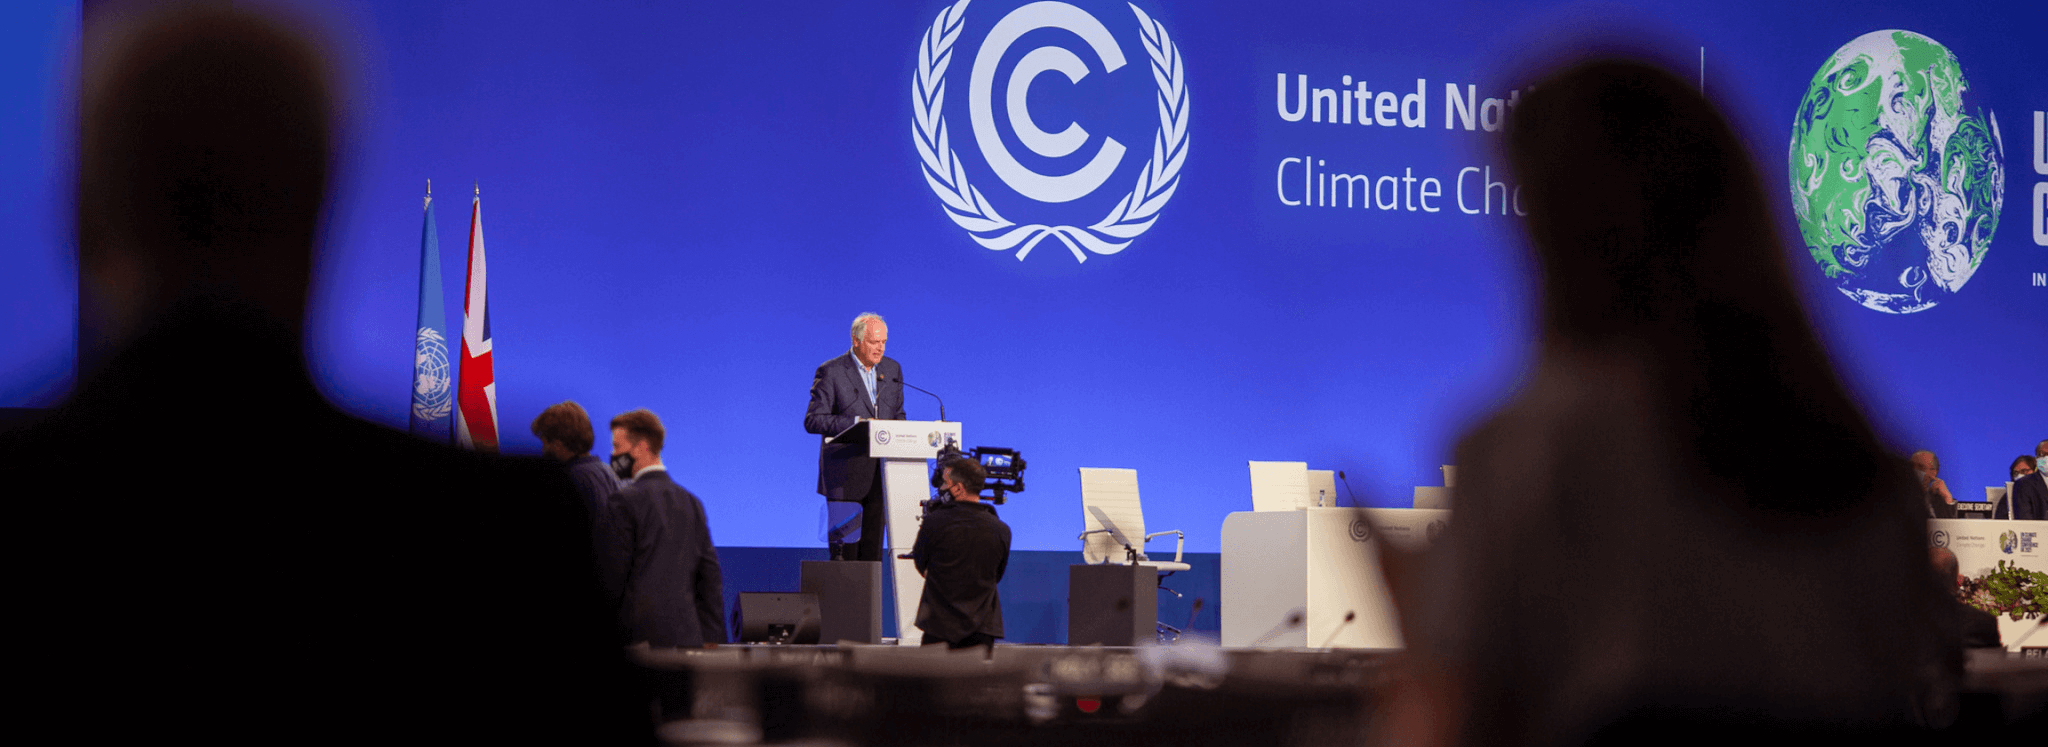 COP26: Successes, shortcomings, and opportunities ahead